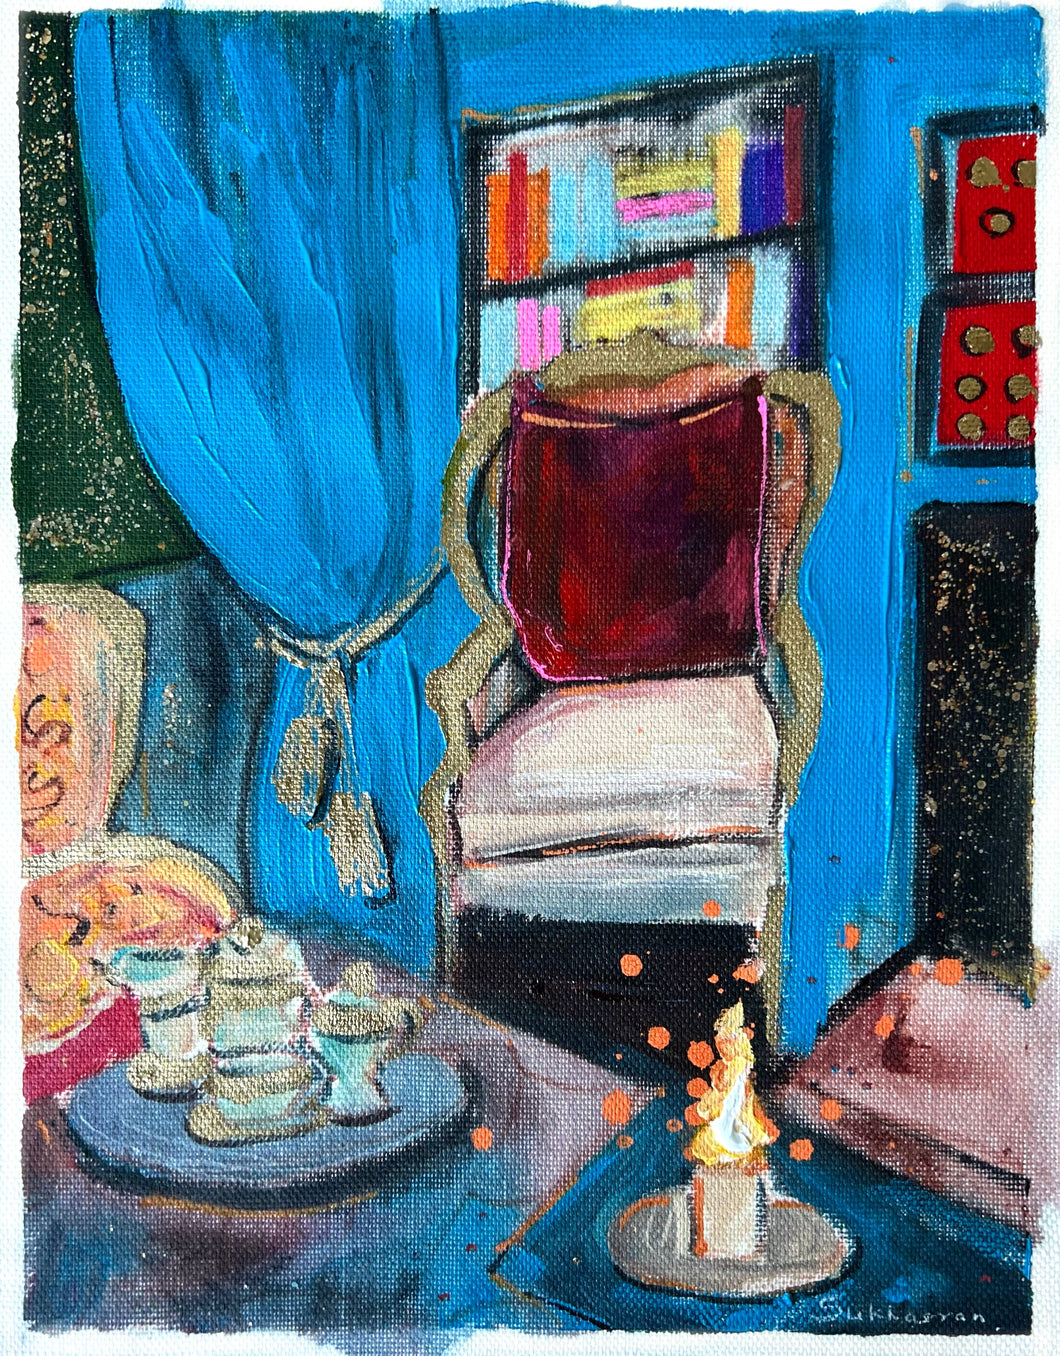 Interior with Blue Curtains